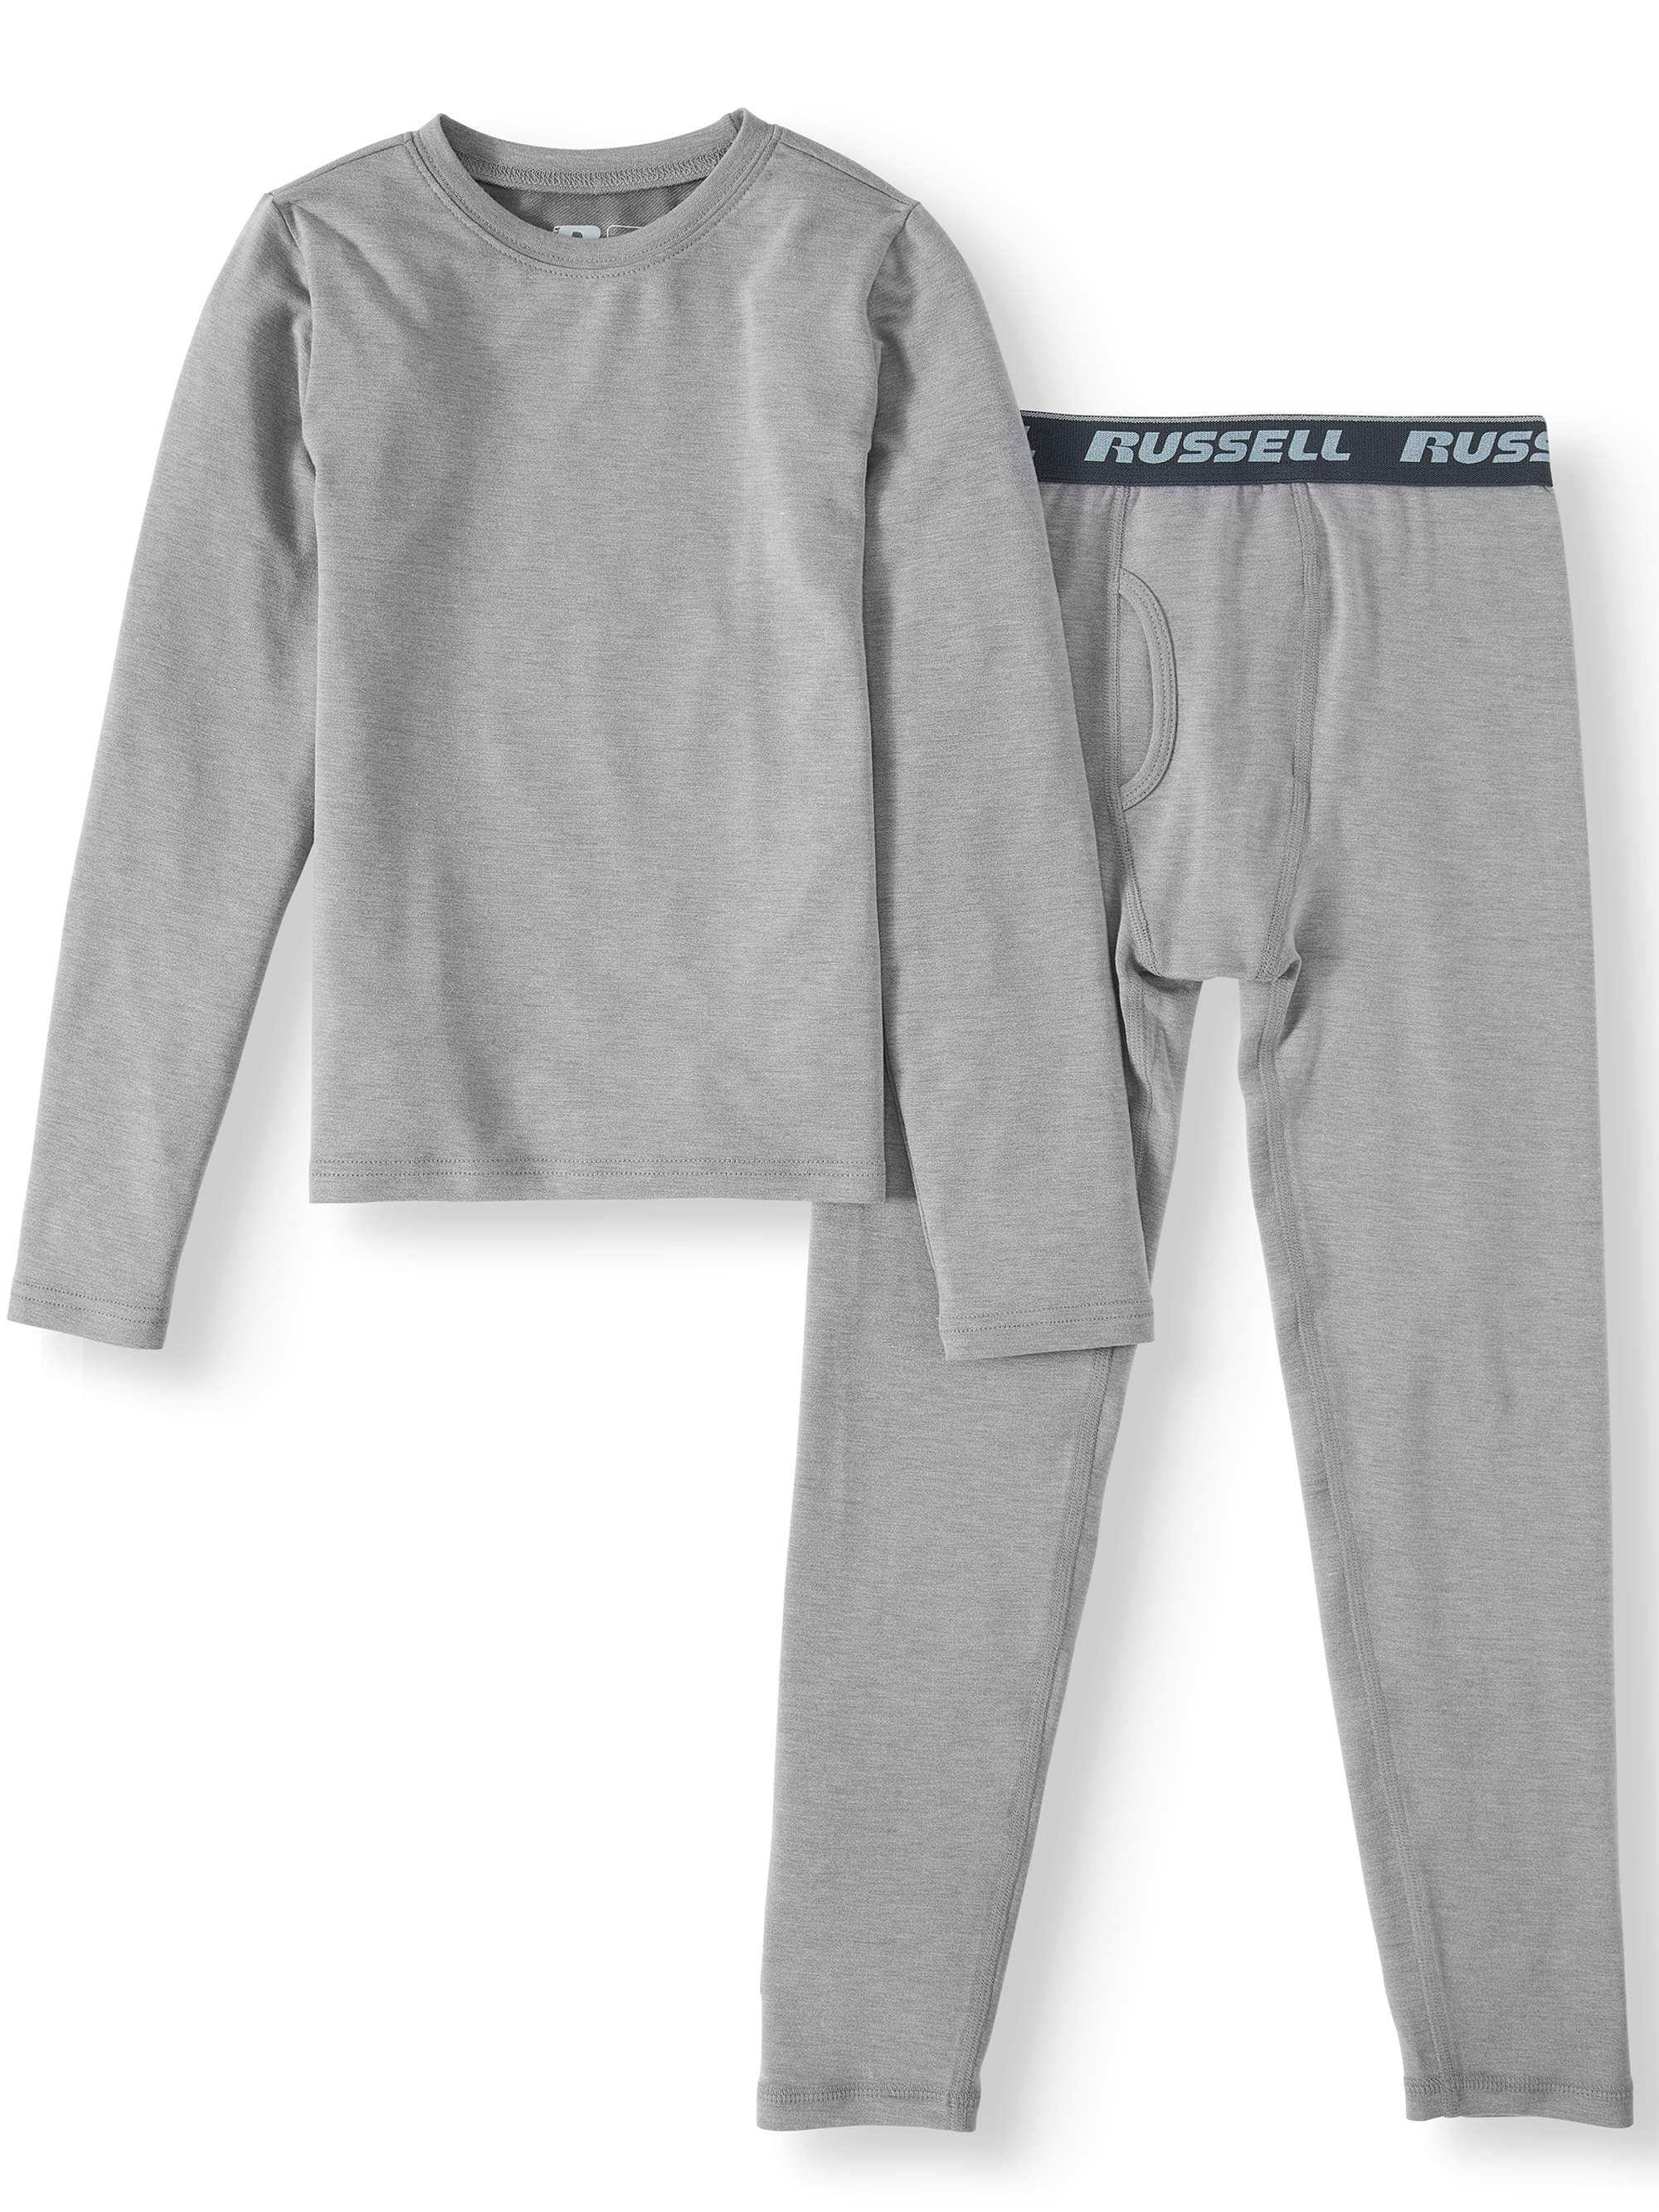 Russell Brands Boys Thermal Gray 